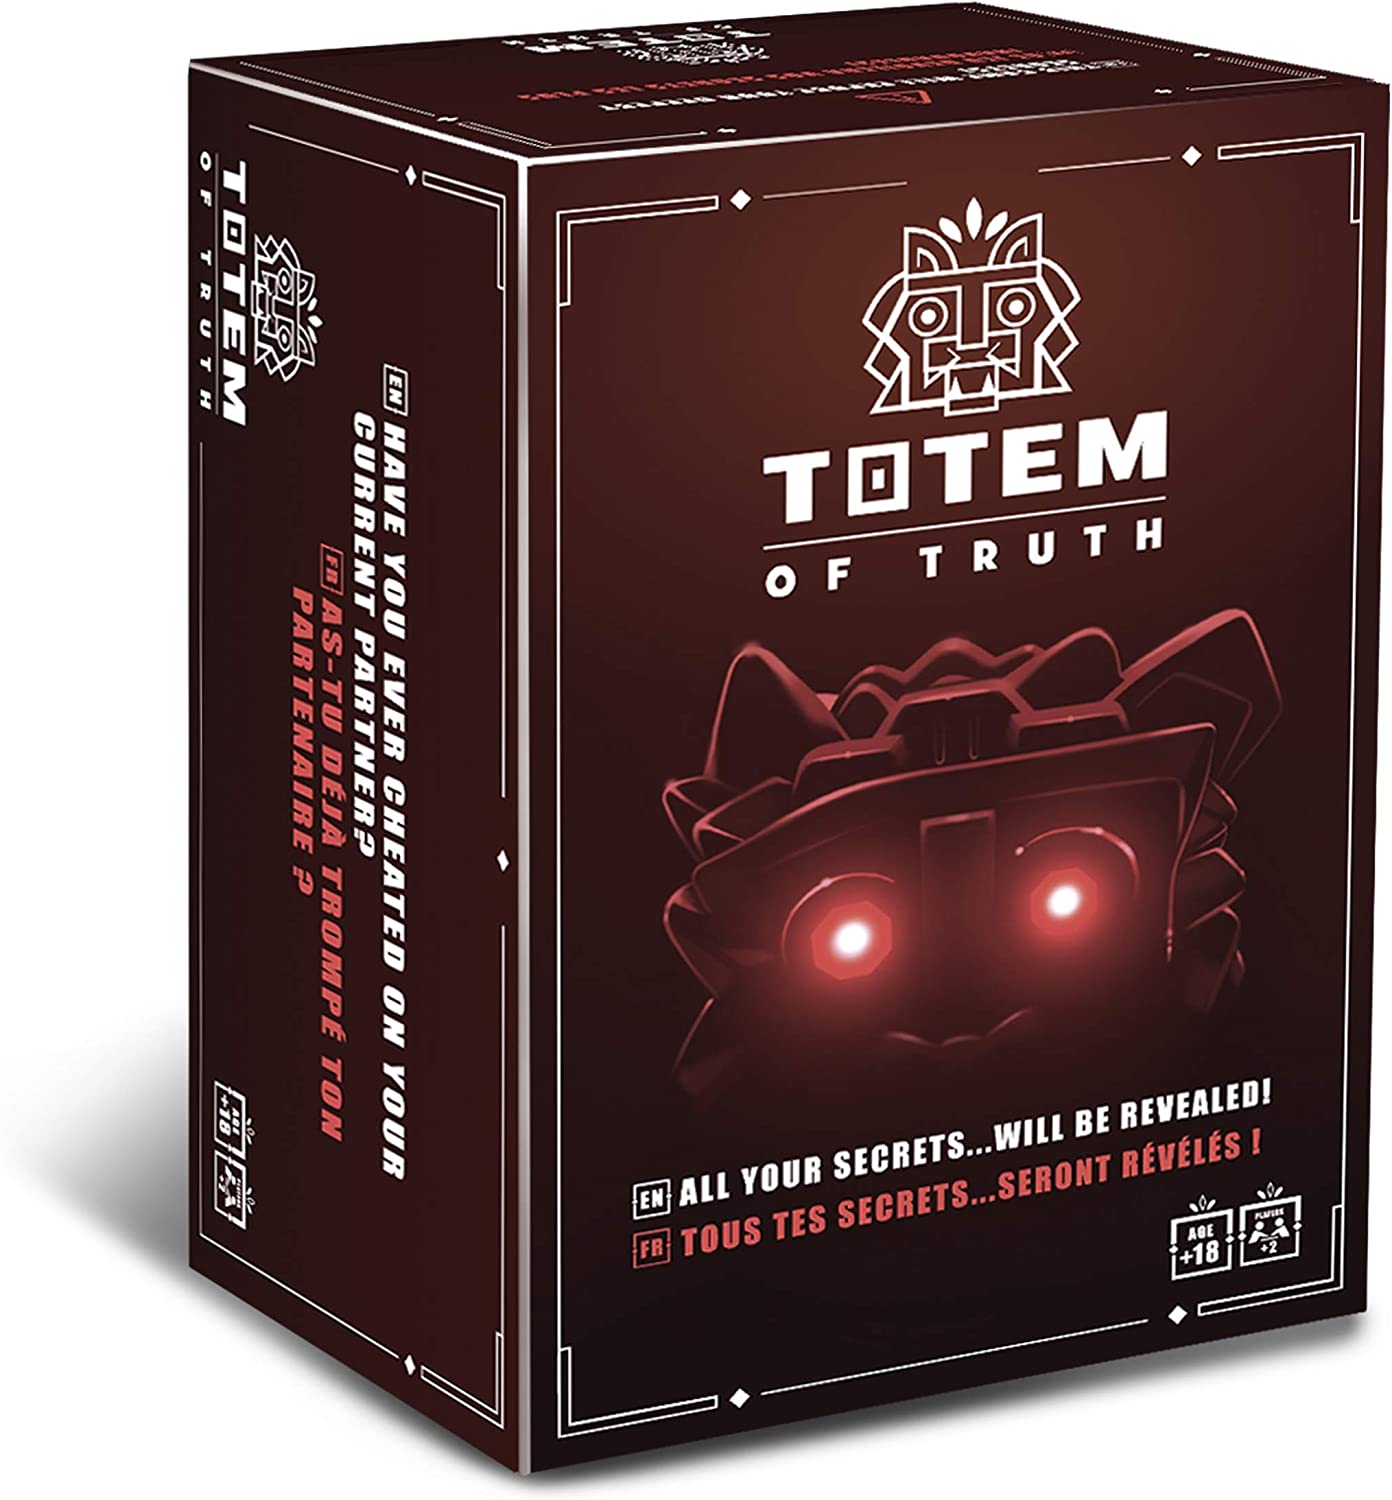 Totem of Truth - A Fun Adult Party Game $3.49 shipped w/ Prime